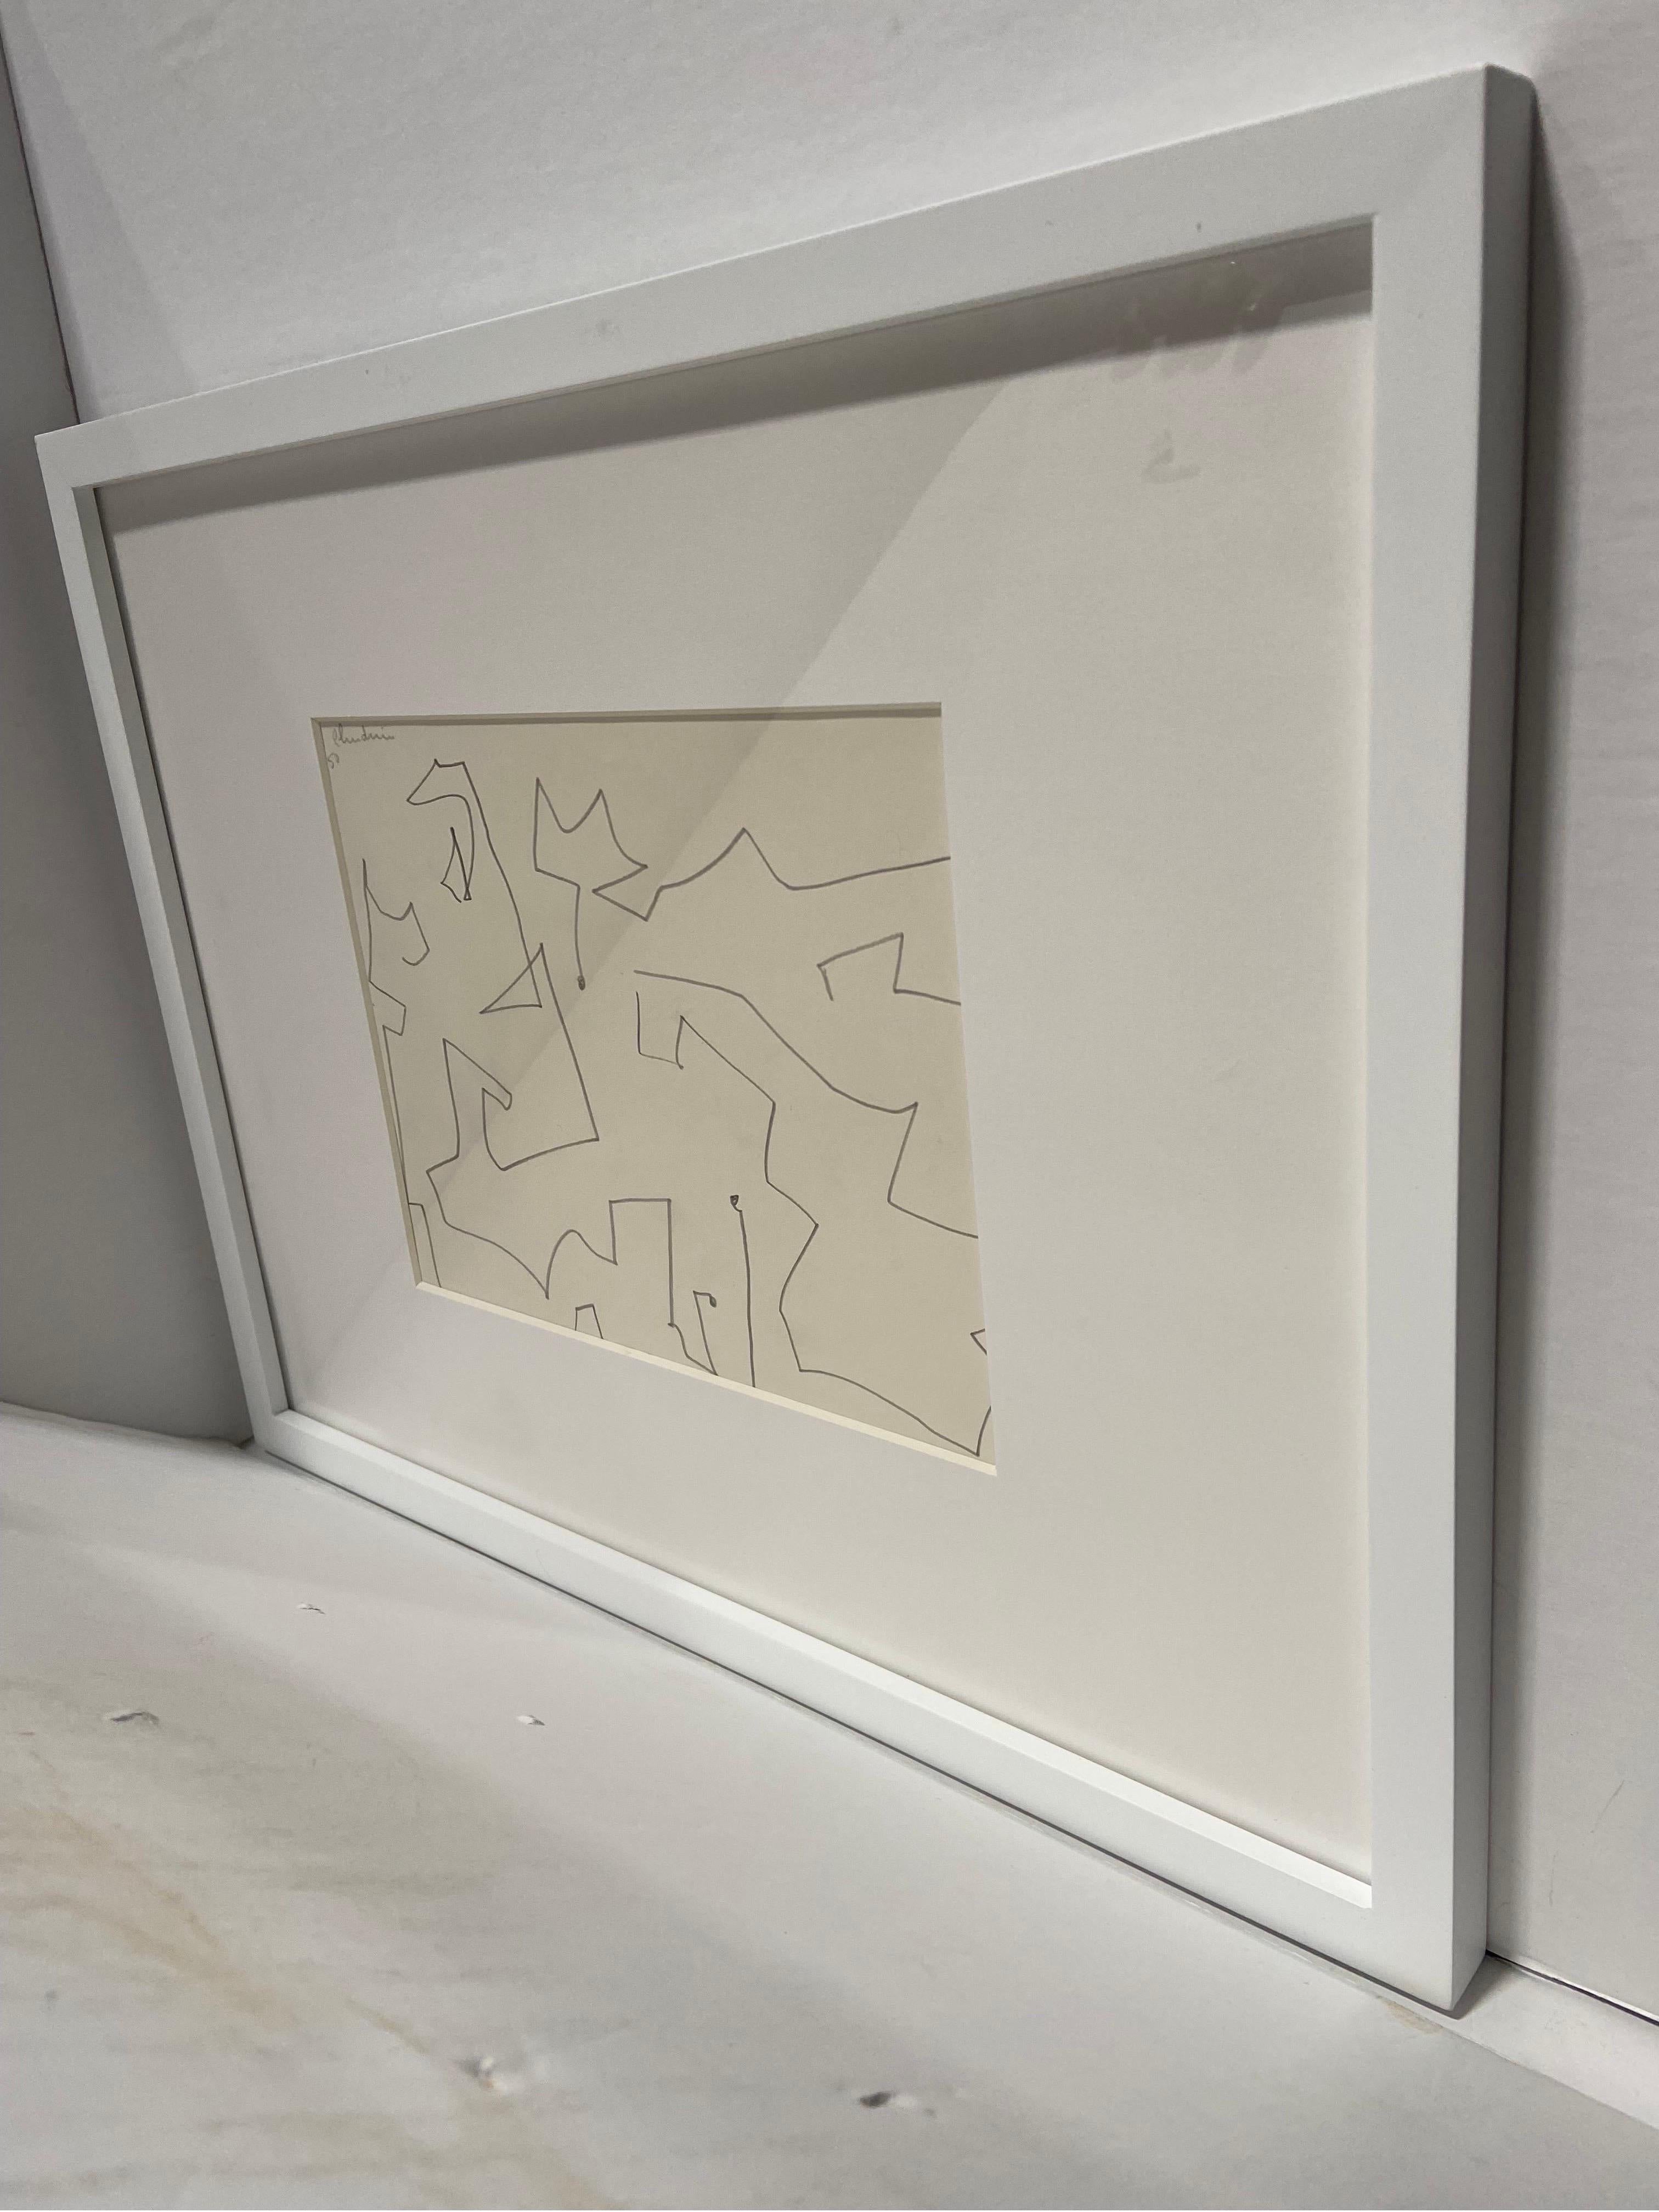 A geometric abstract drawing work on paper by New York City artist Eve Clendenin (1900 - 1974). Ms. Clendenin was both a student of and friend to the master 20th Century artist Hans Hofmann. Her letters and correspondence to Mr. Hofmann are well